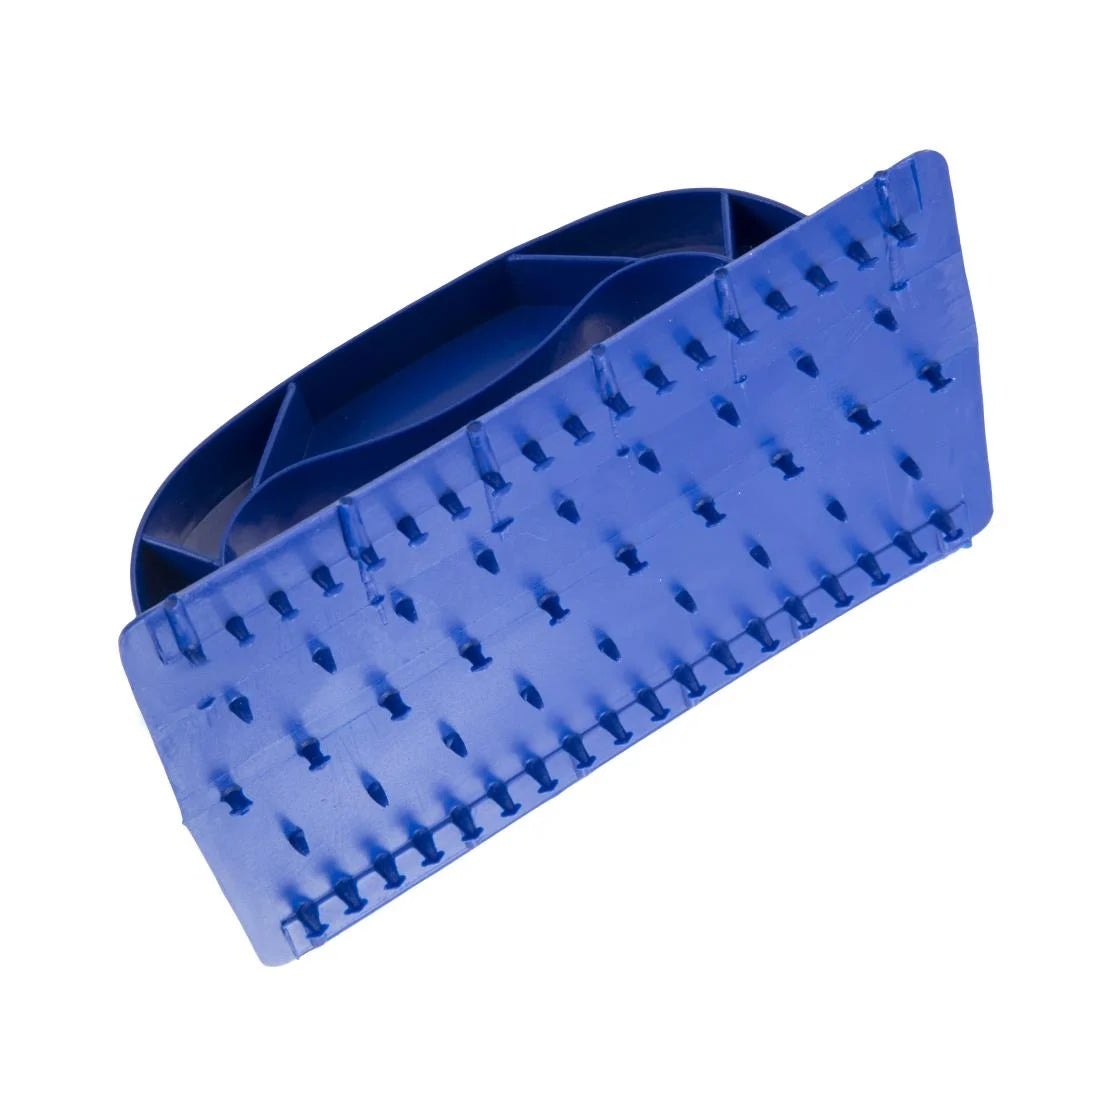 Griddle Cleaner Pad Holder.Product Ref:00616. In Stock